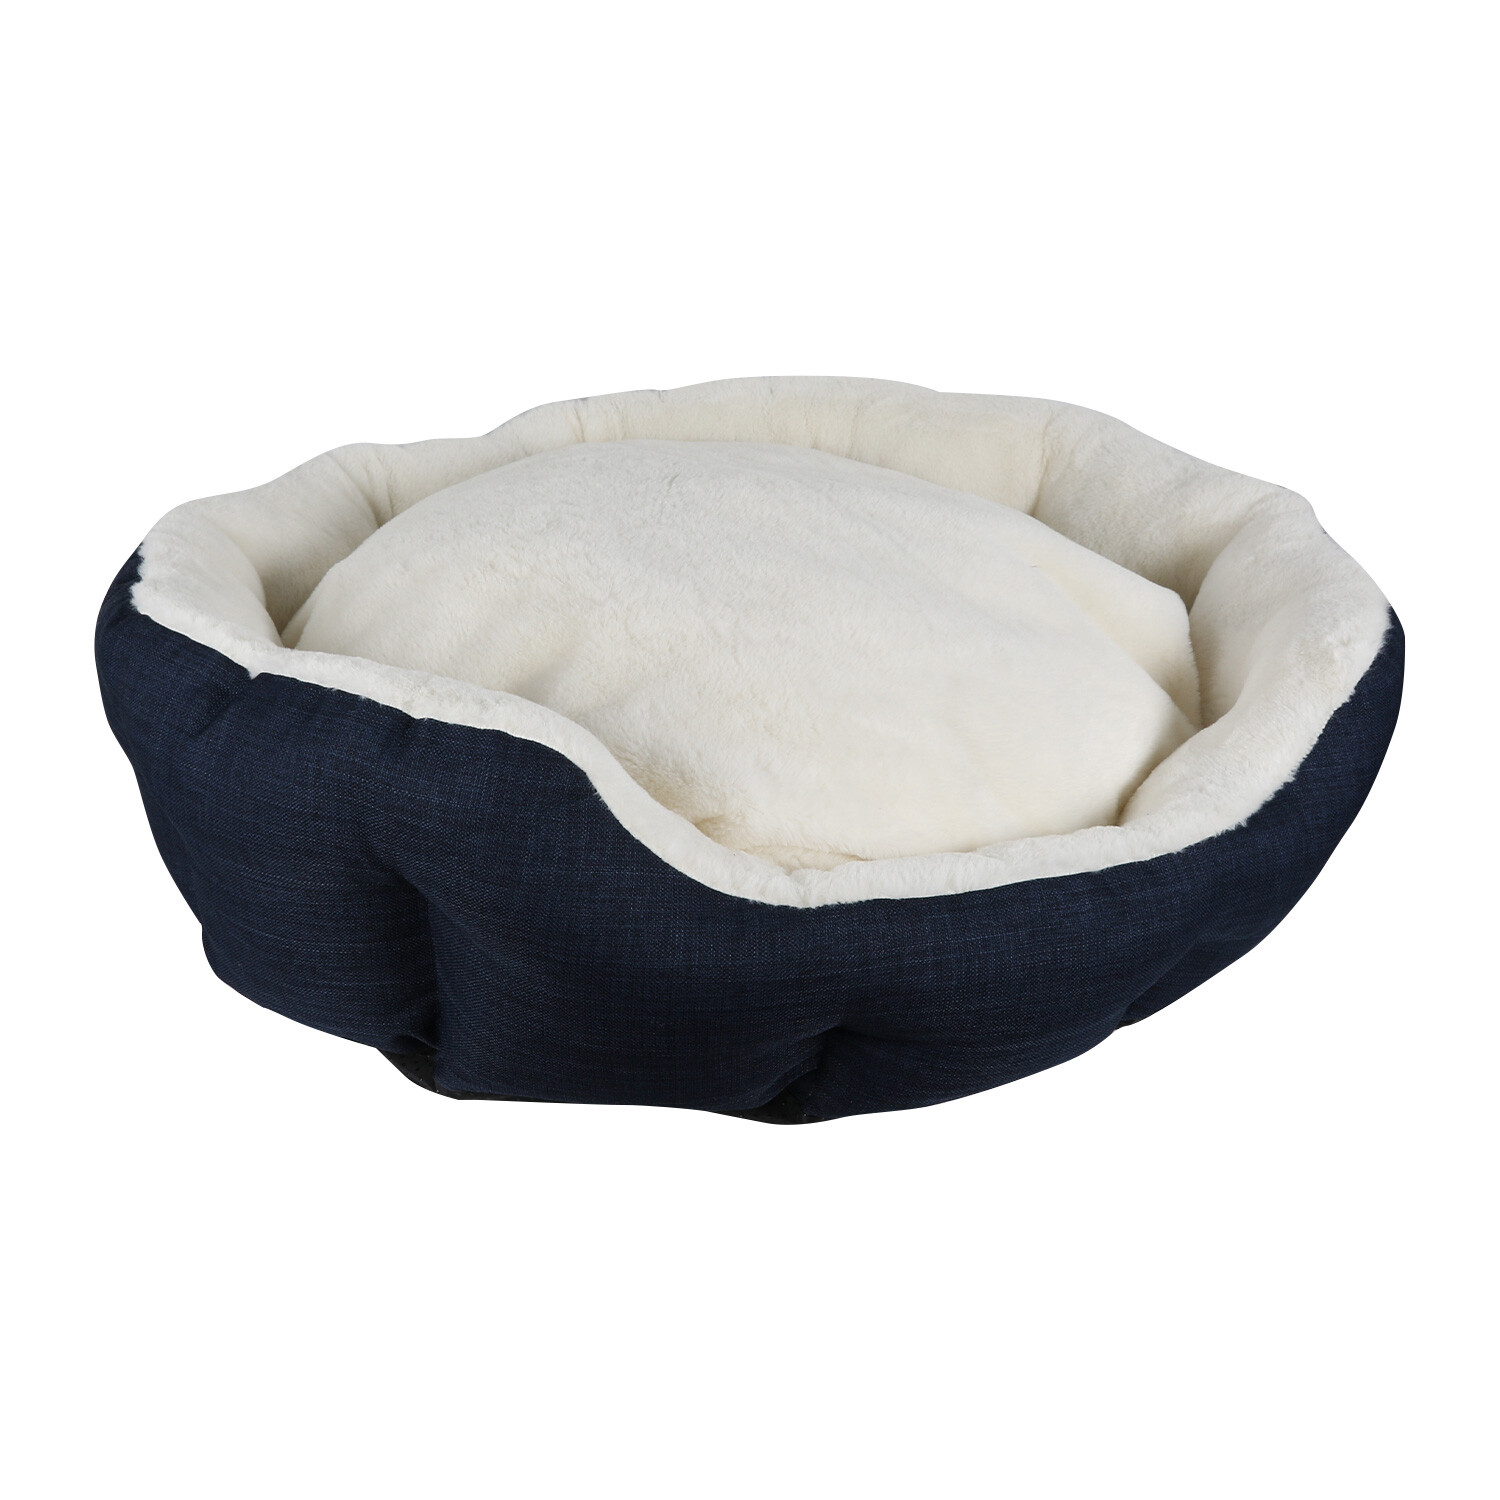 Clever Paws Luxury Large Navy Dog Bed Image 2